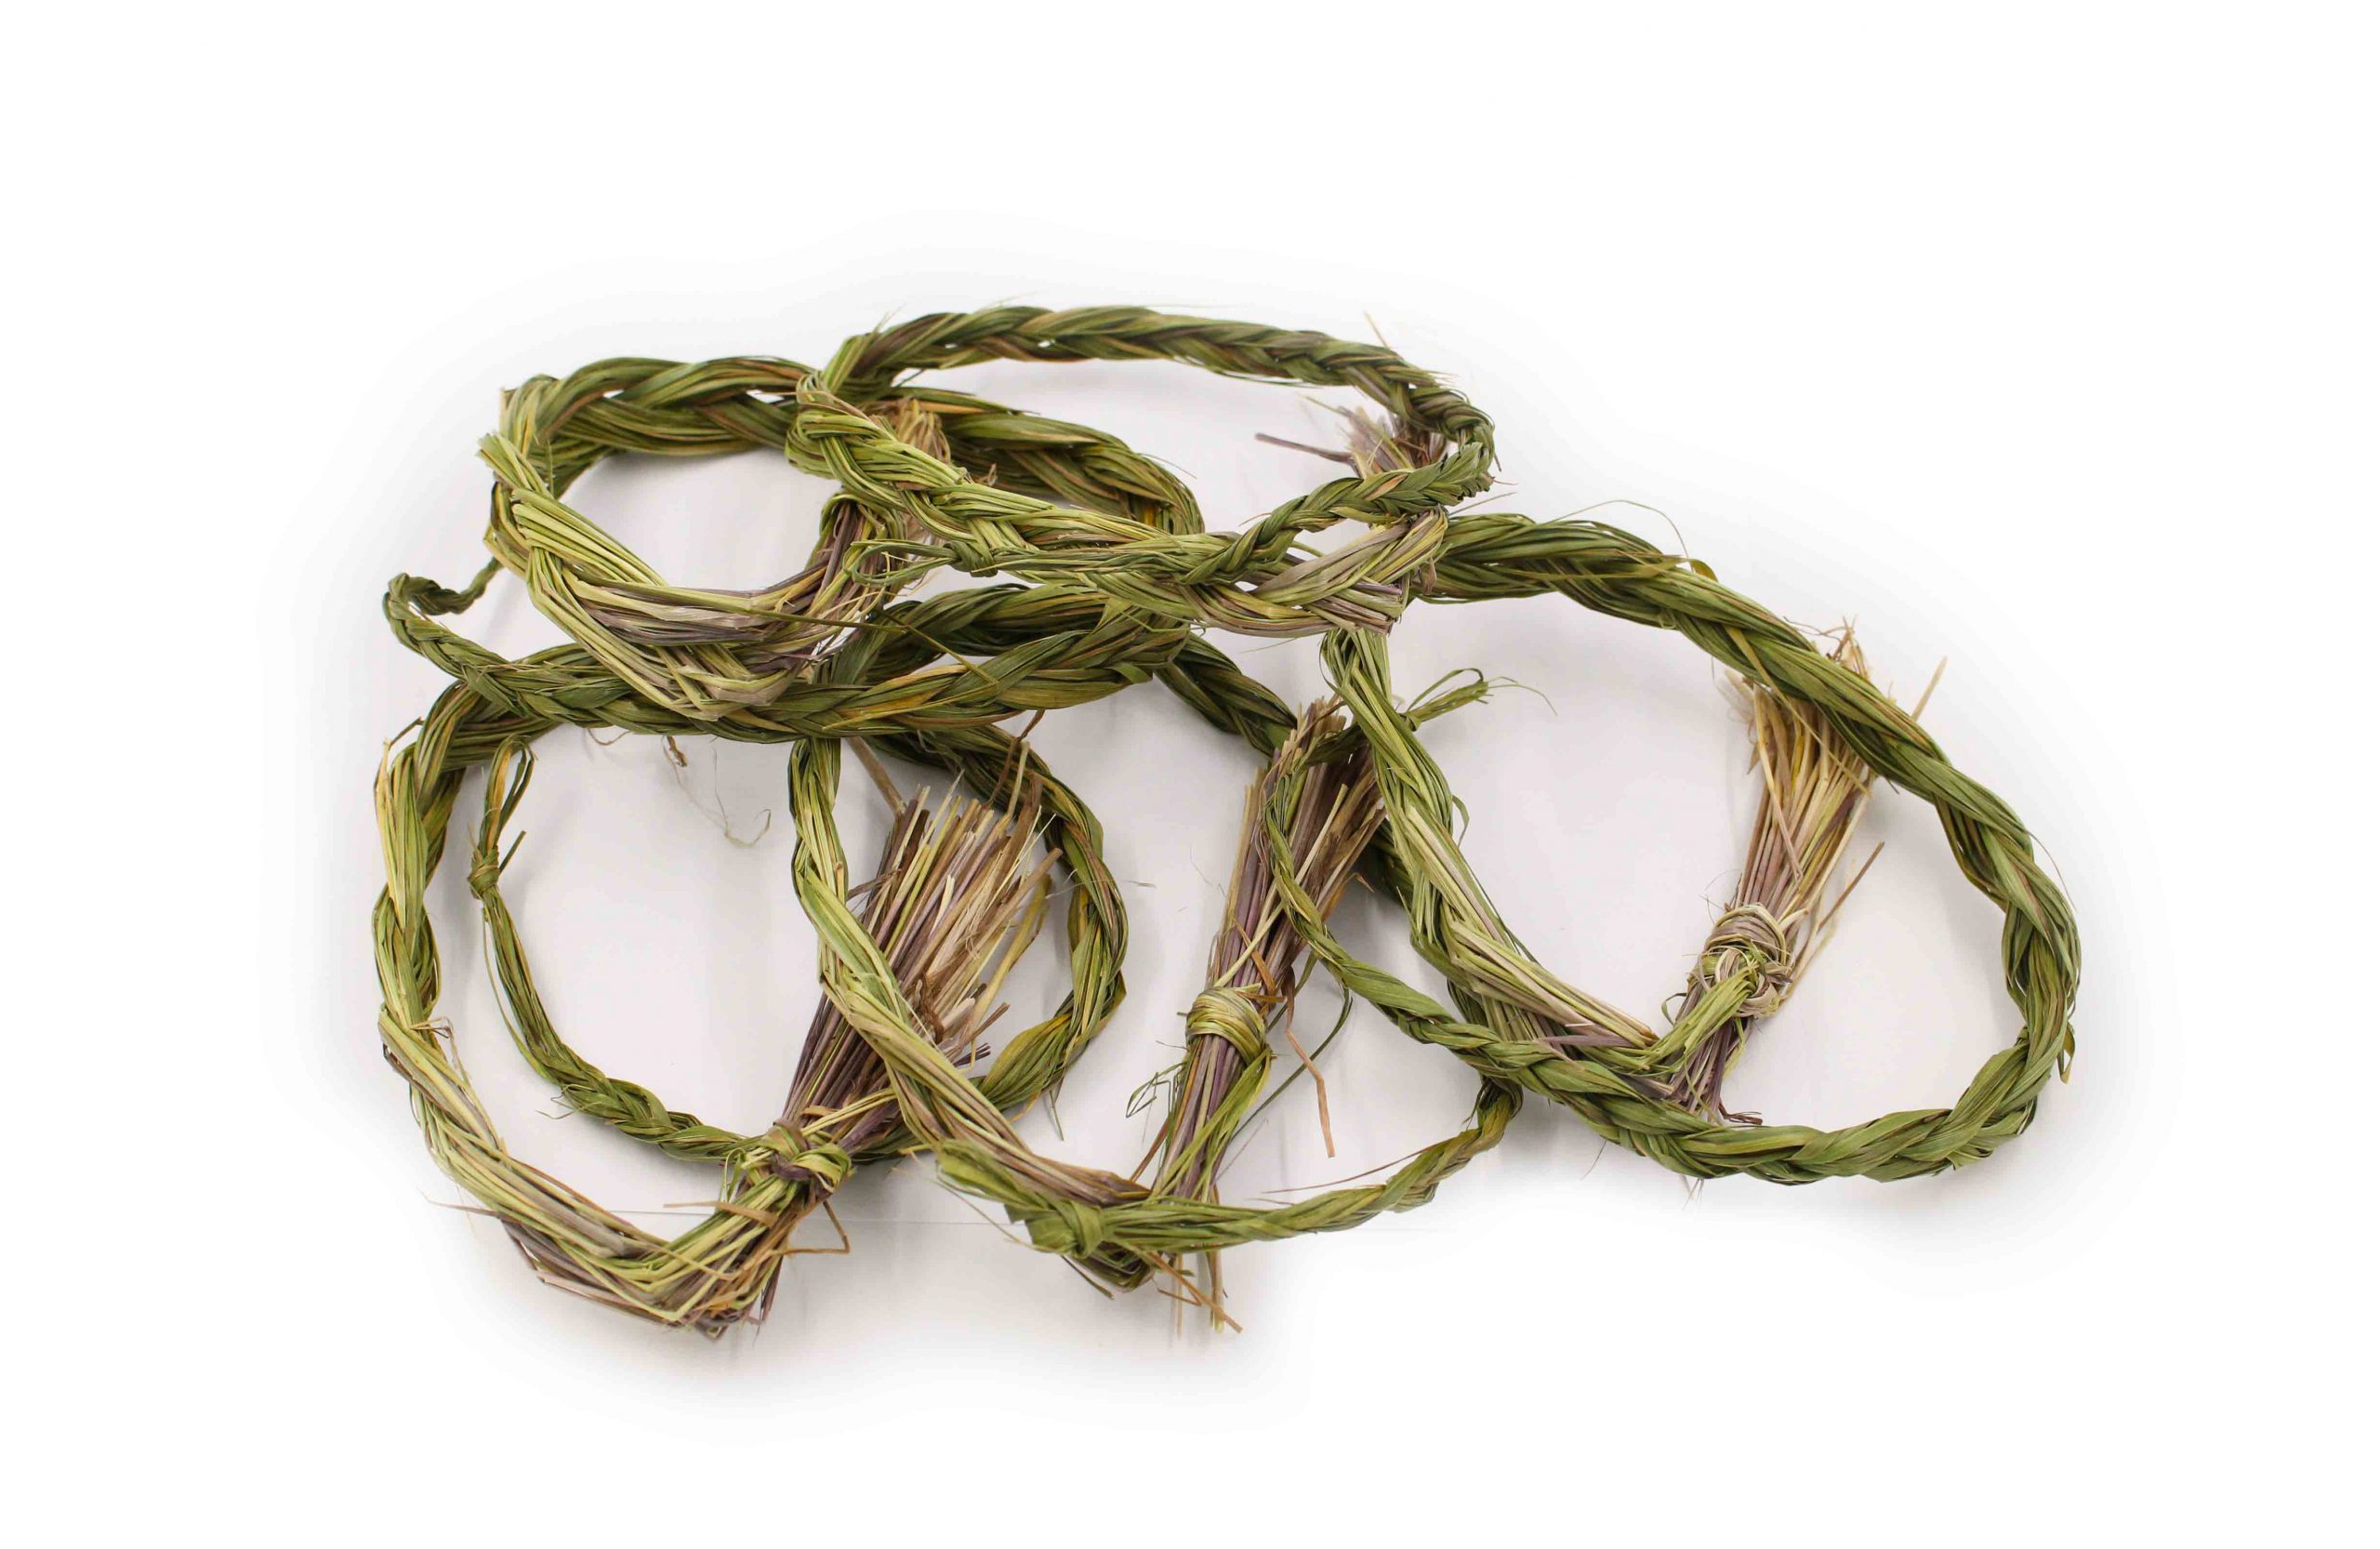 Sweetgrass Smudging Herb - Crystal Dreams